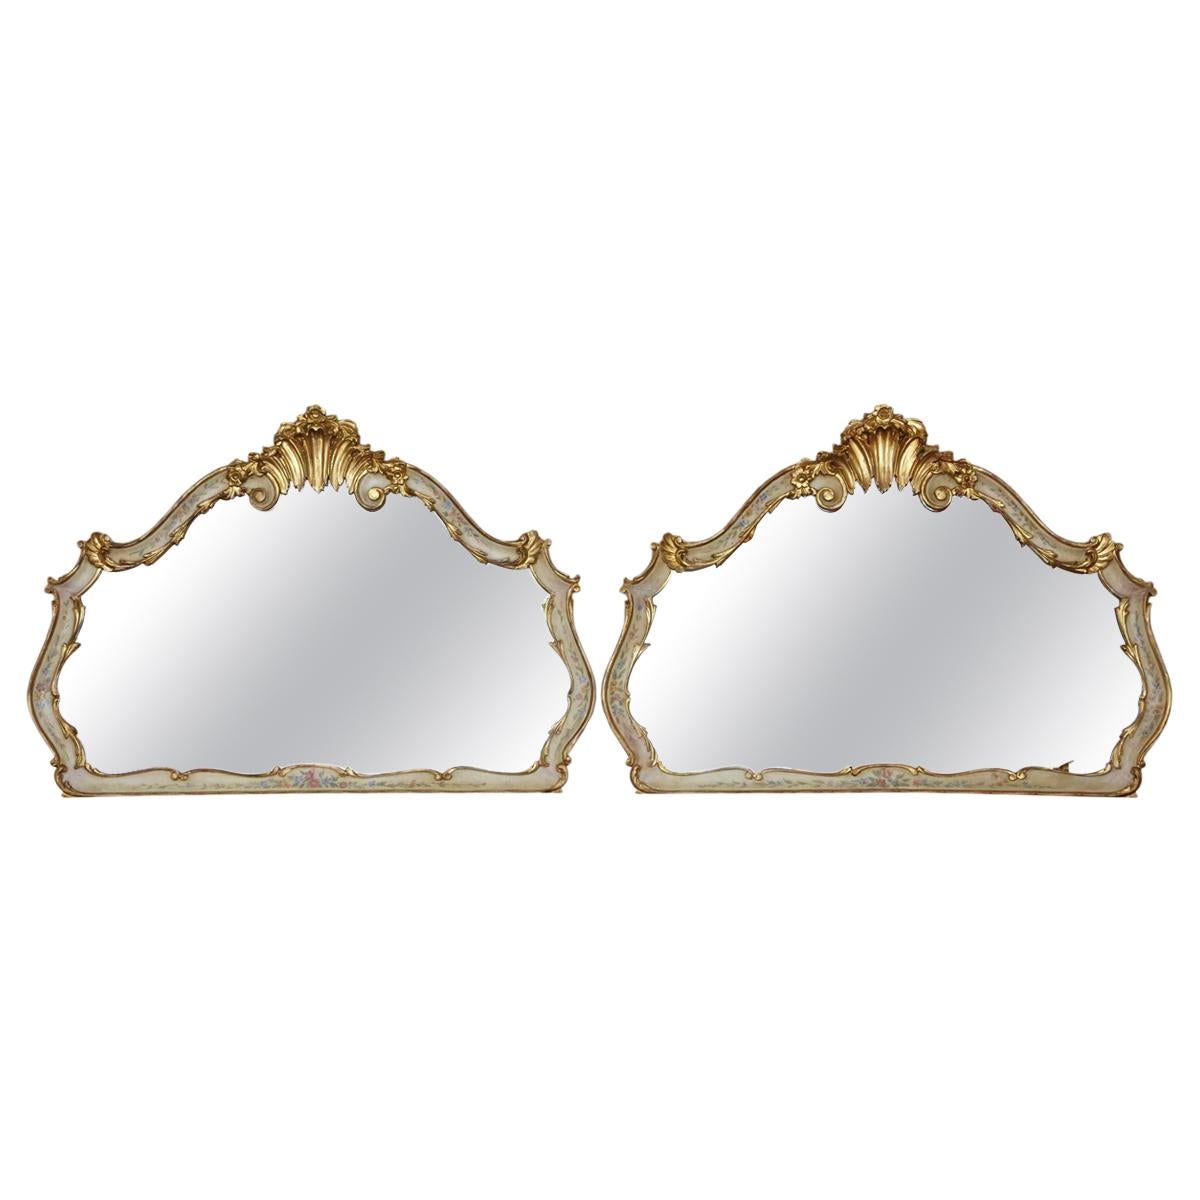 Antique Pair of Large Decorated Gilt Wall Mirrors, 19th Century For Sale